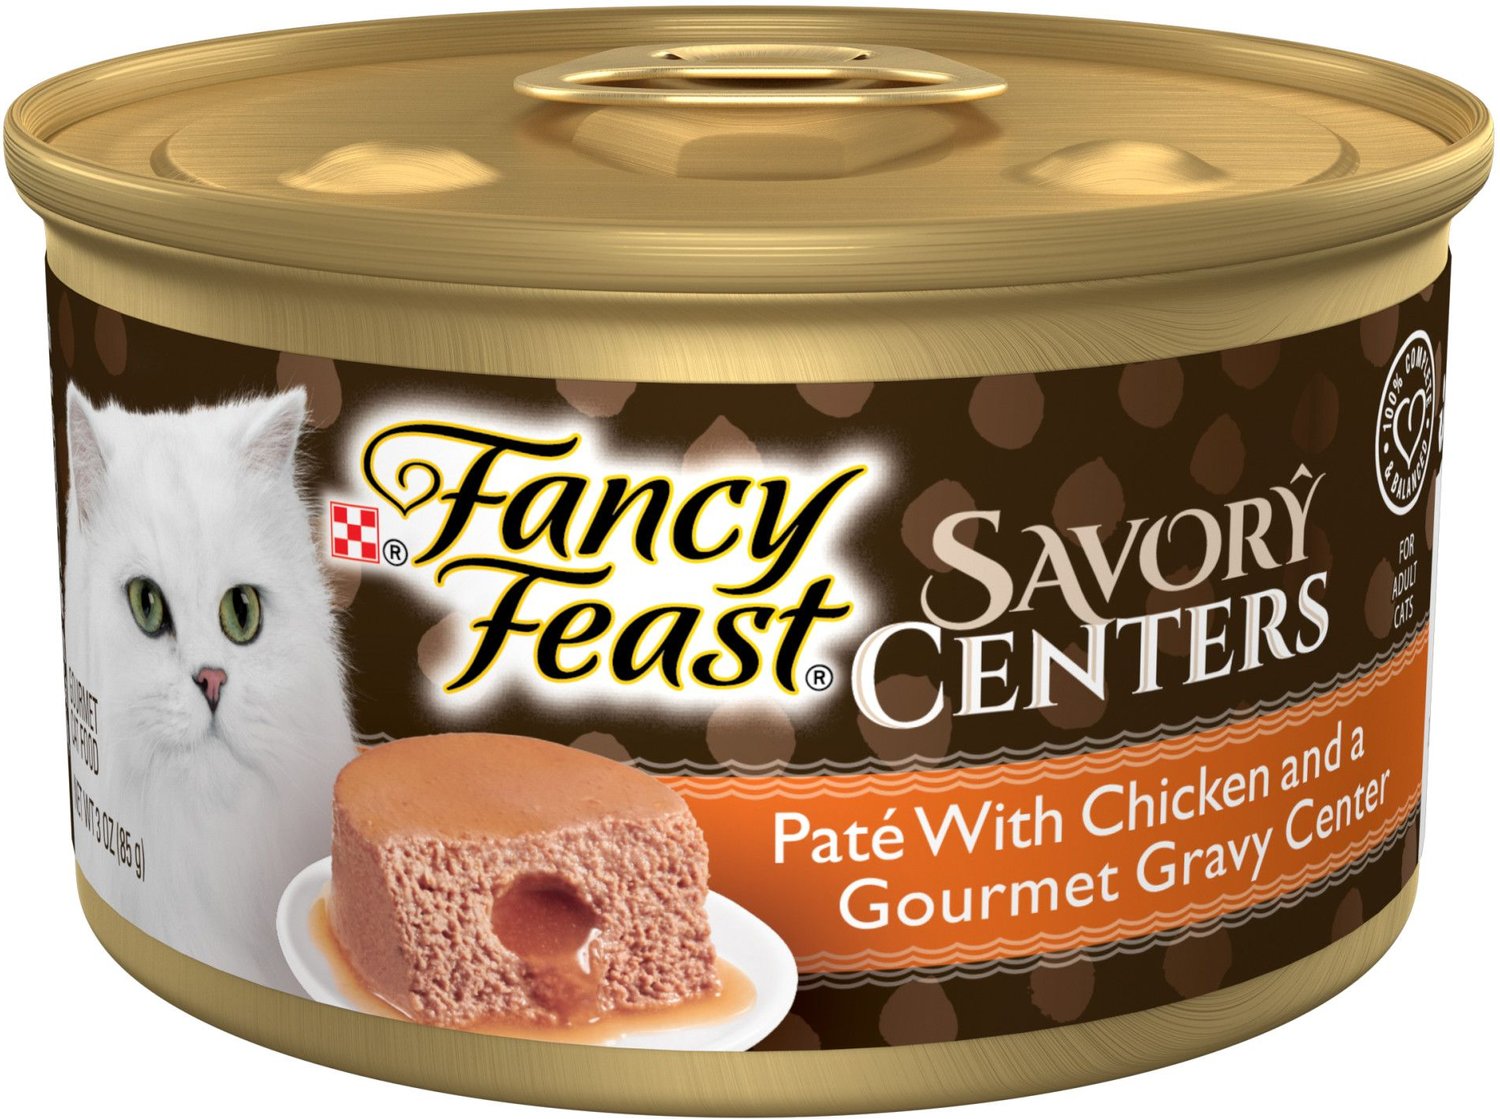 FANCY FEAST Savory Centers Chicken Canned Cat Food, 3oz, case of 24